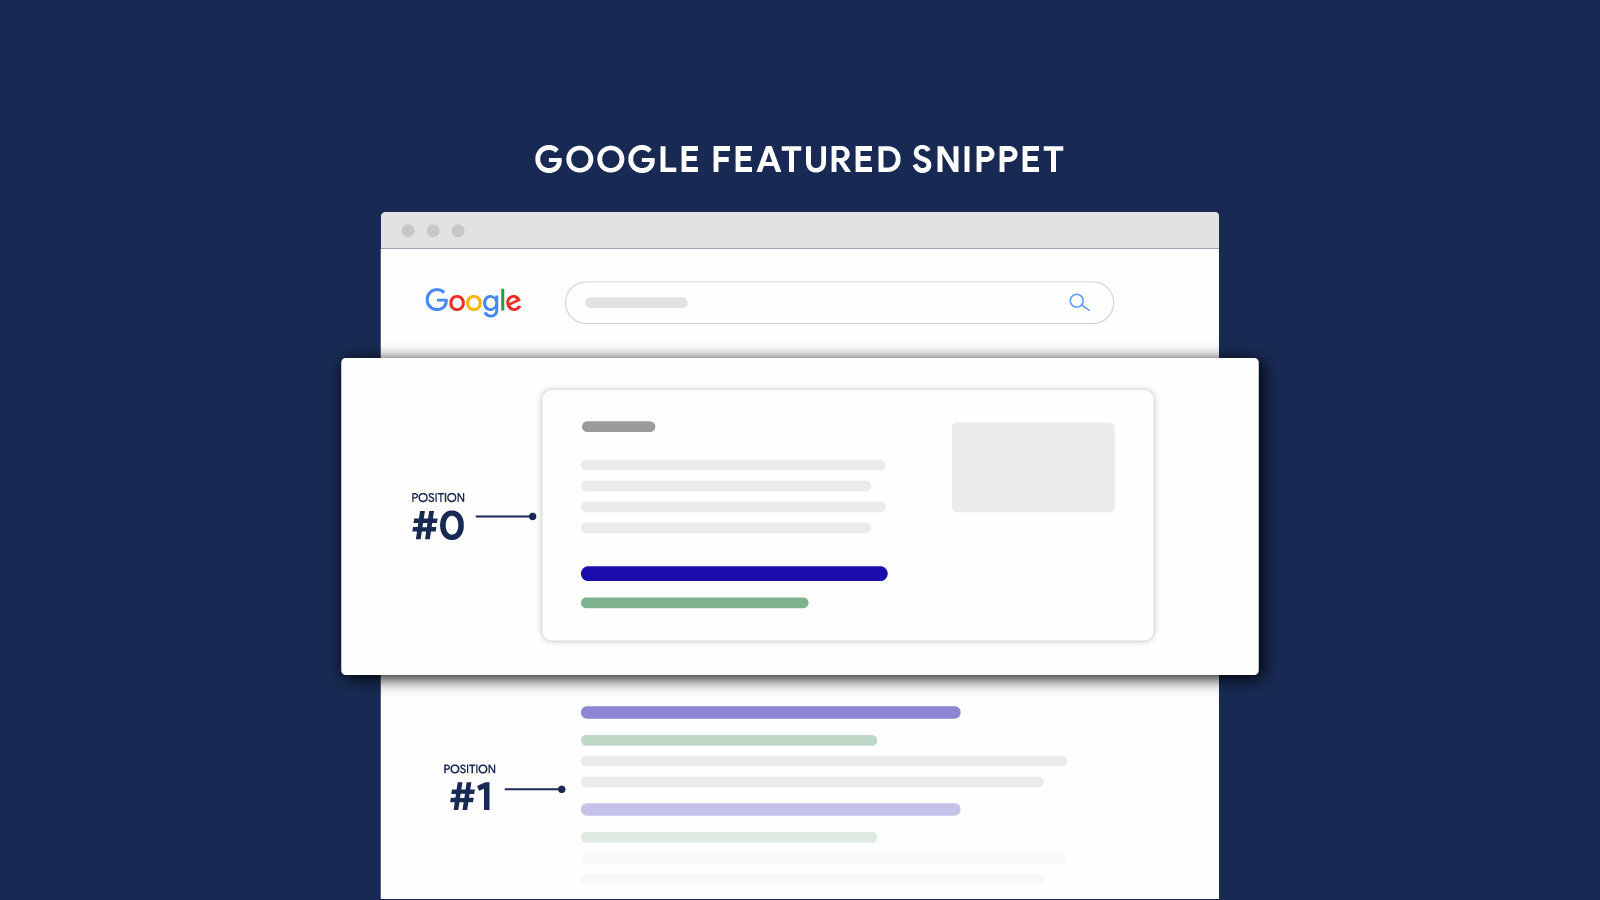 How to Optimize for Featured Snippet - Vikram Soni